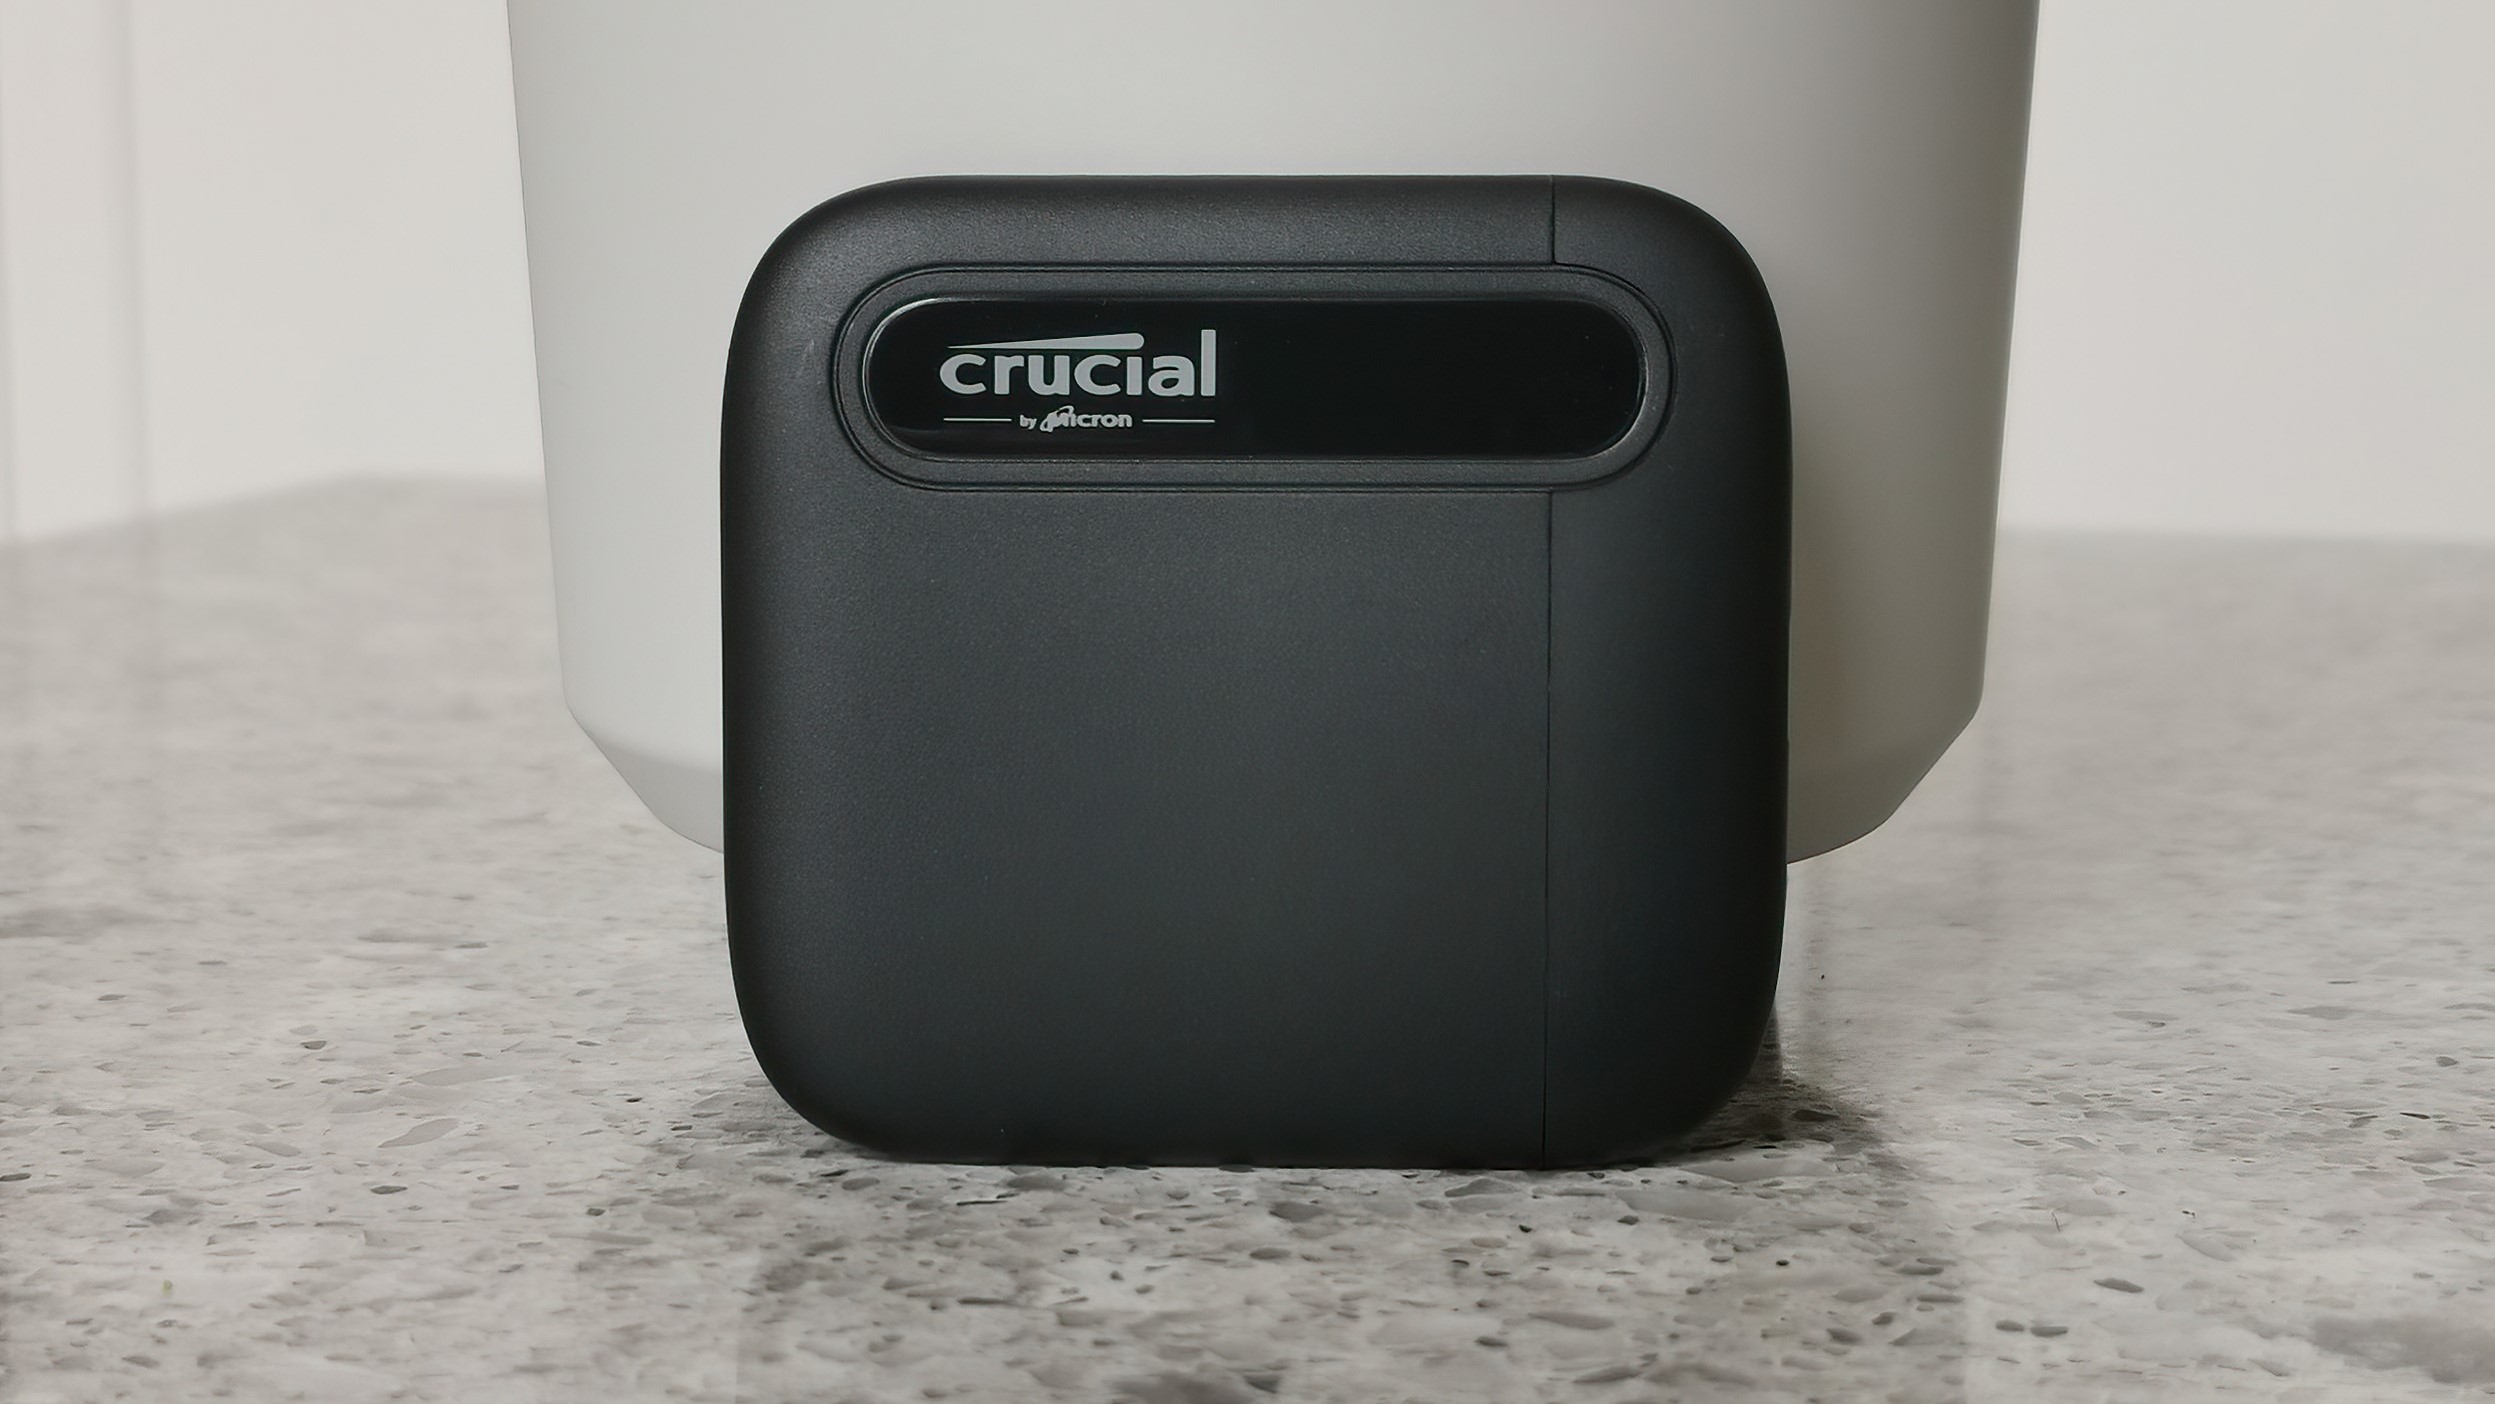 Crucial X6 4TB Portable SSD review: Decent speed, good price to performance  - General Discussion Discussions on AppleInsider Forums